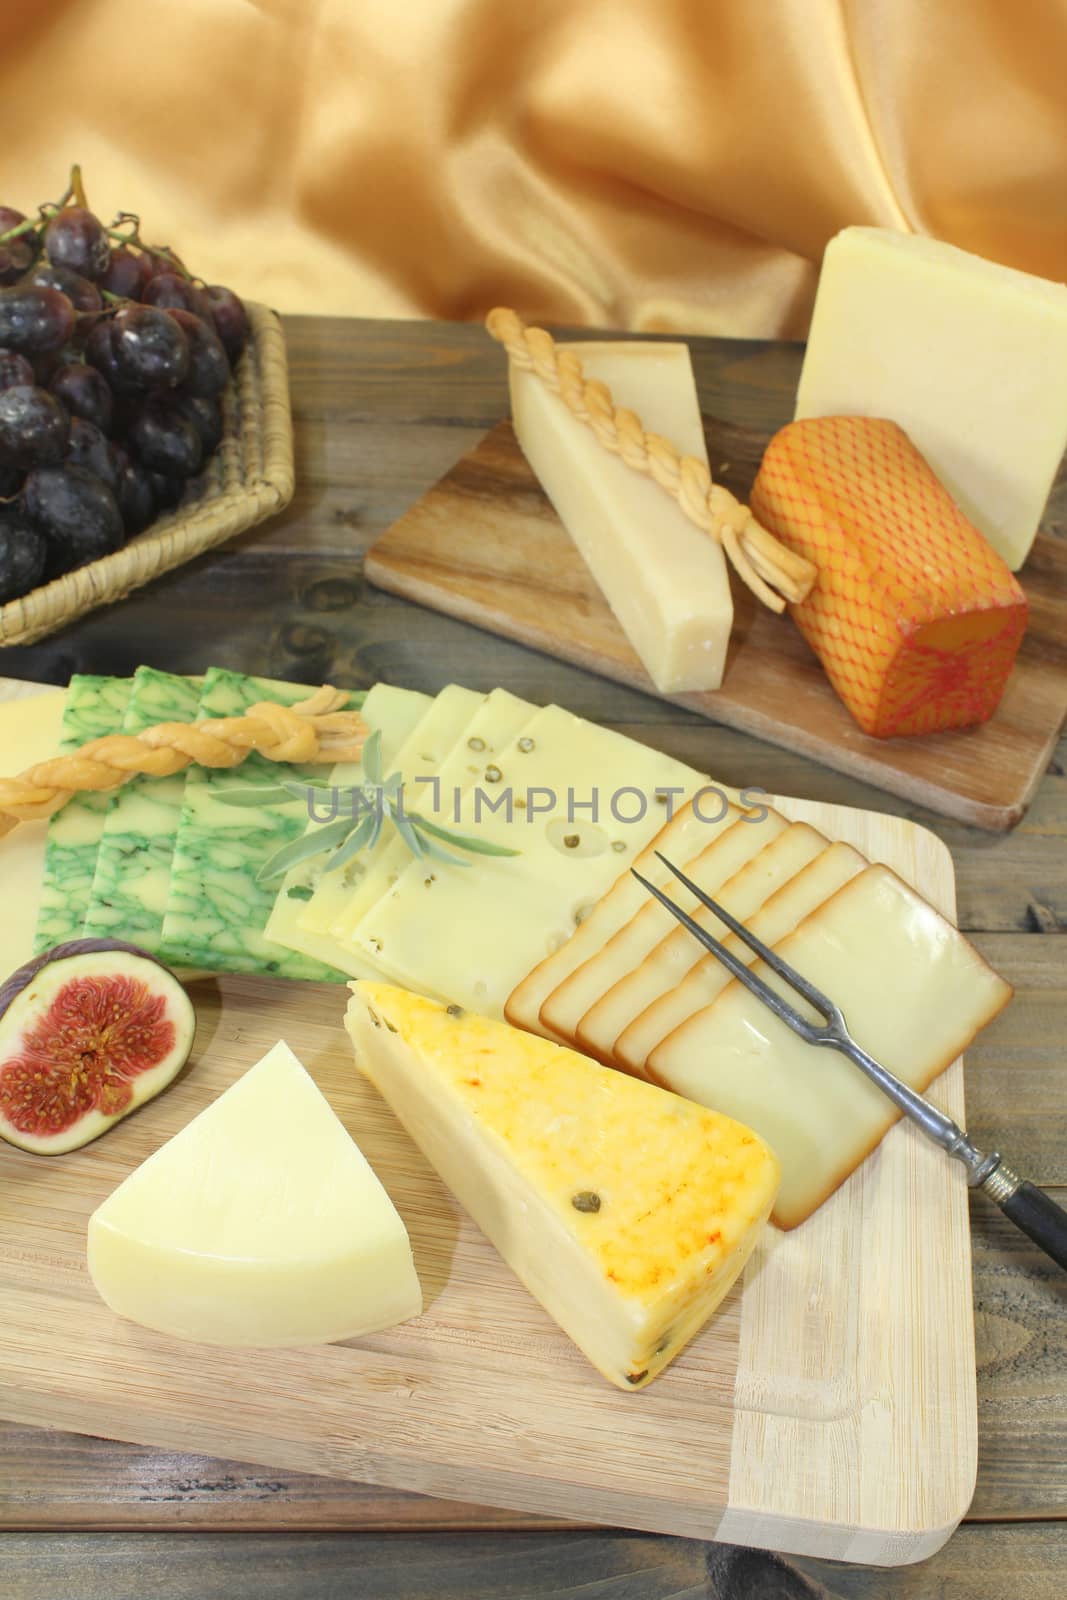 Slices of cheese with grapes and figs by discovery